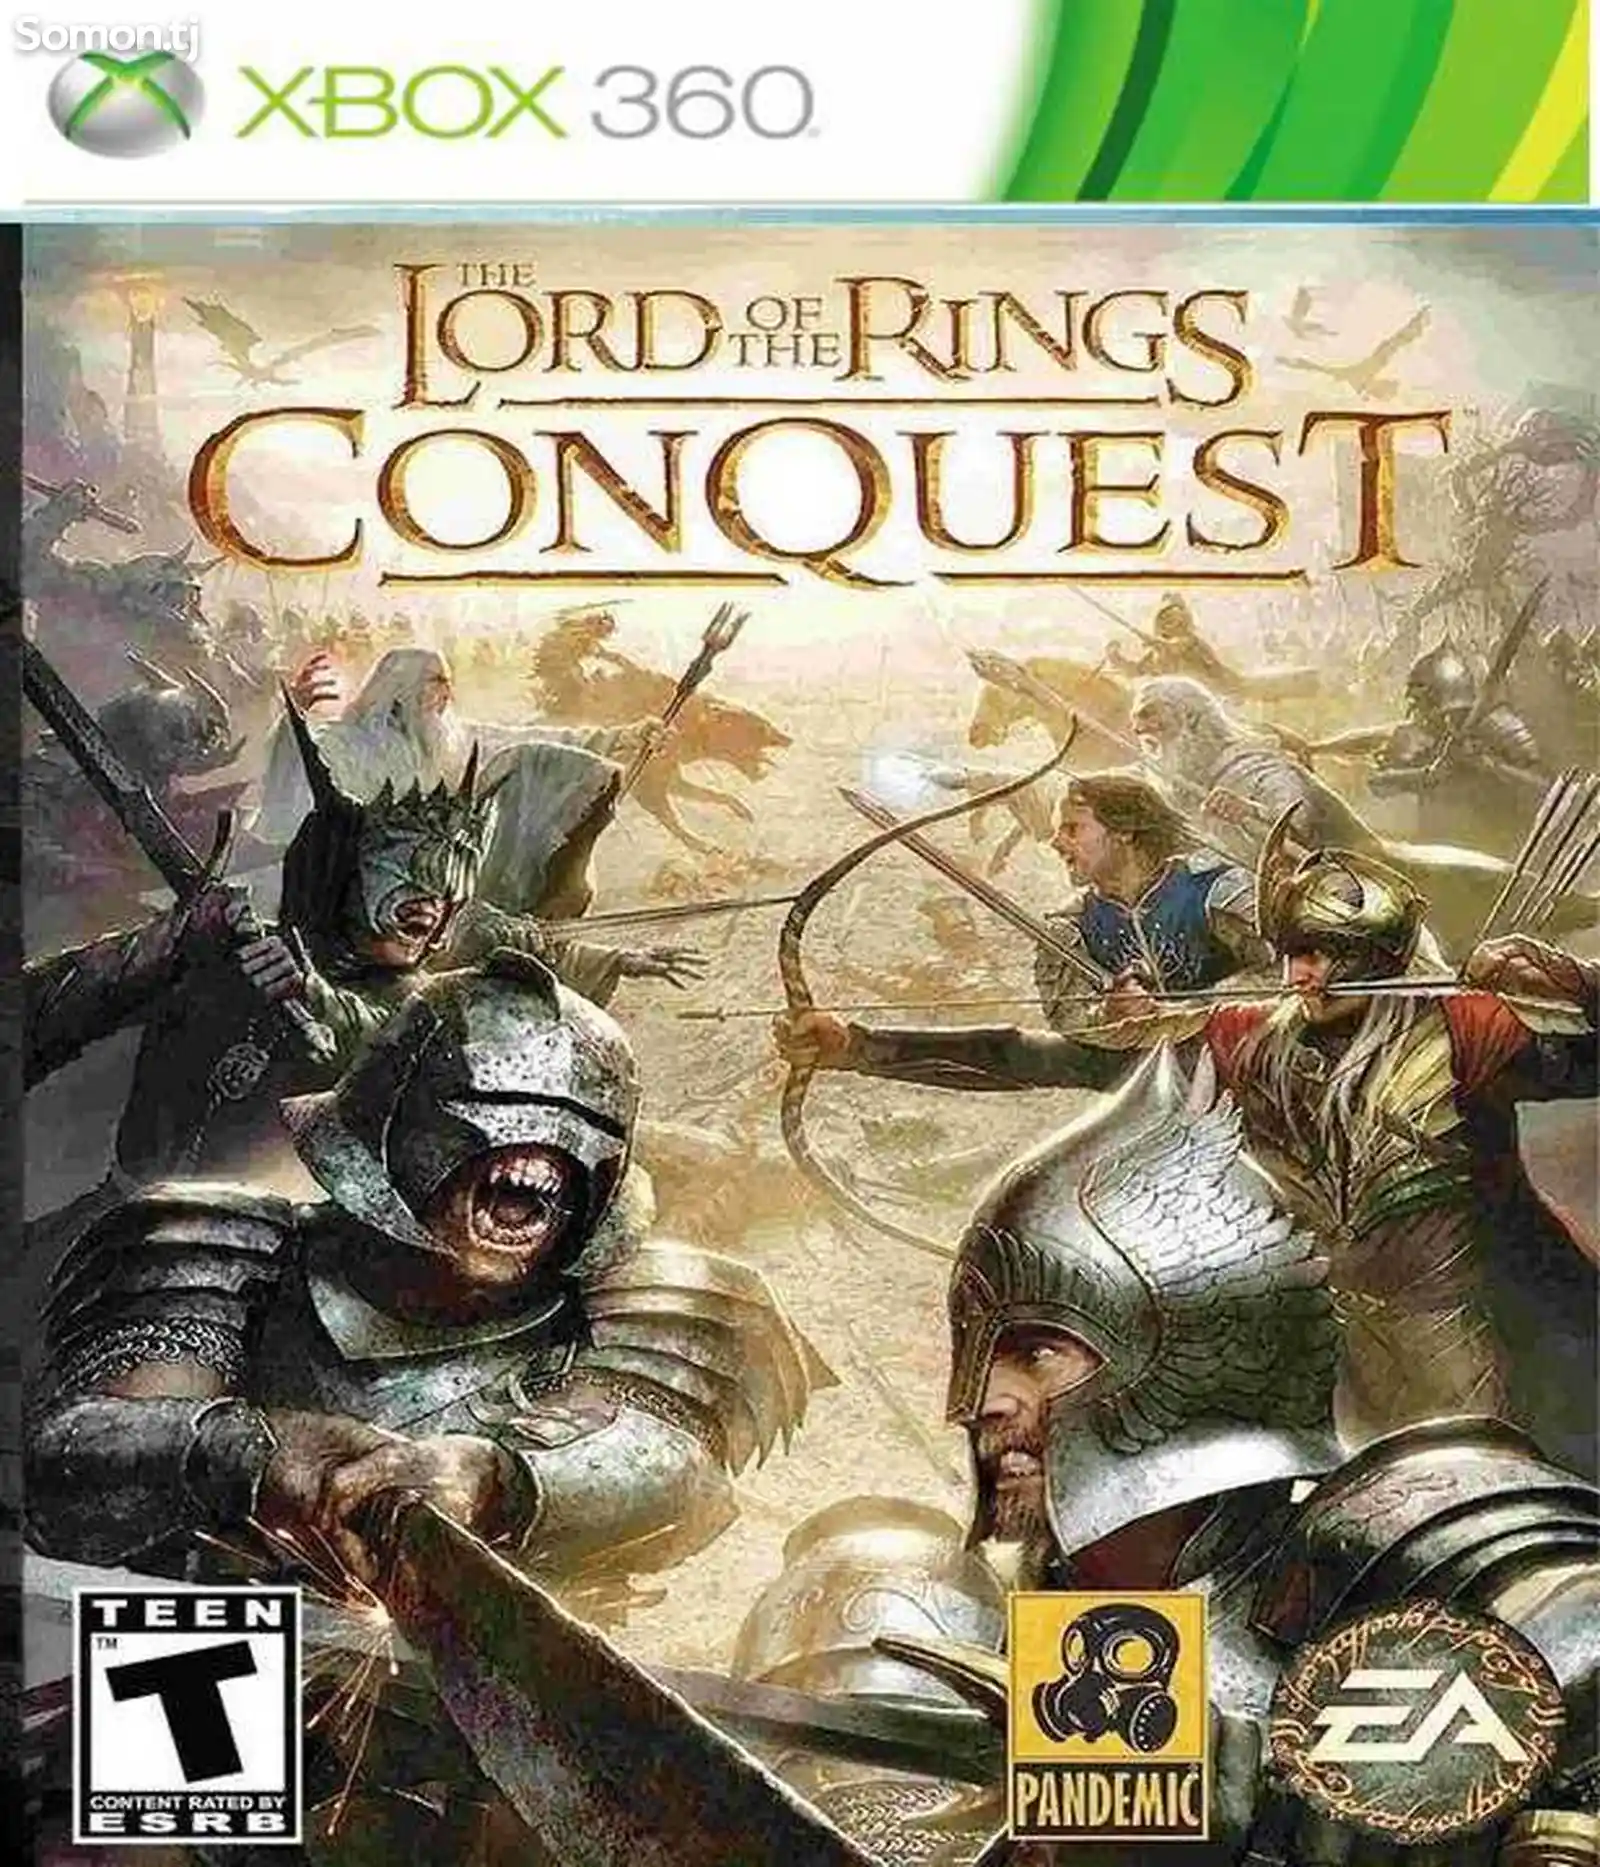 Игра The lord of the rings conquest для прошитых Xbox 360